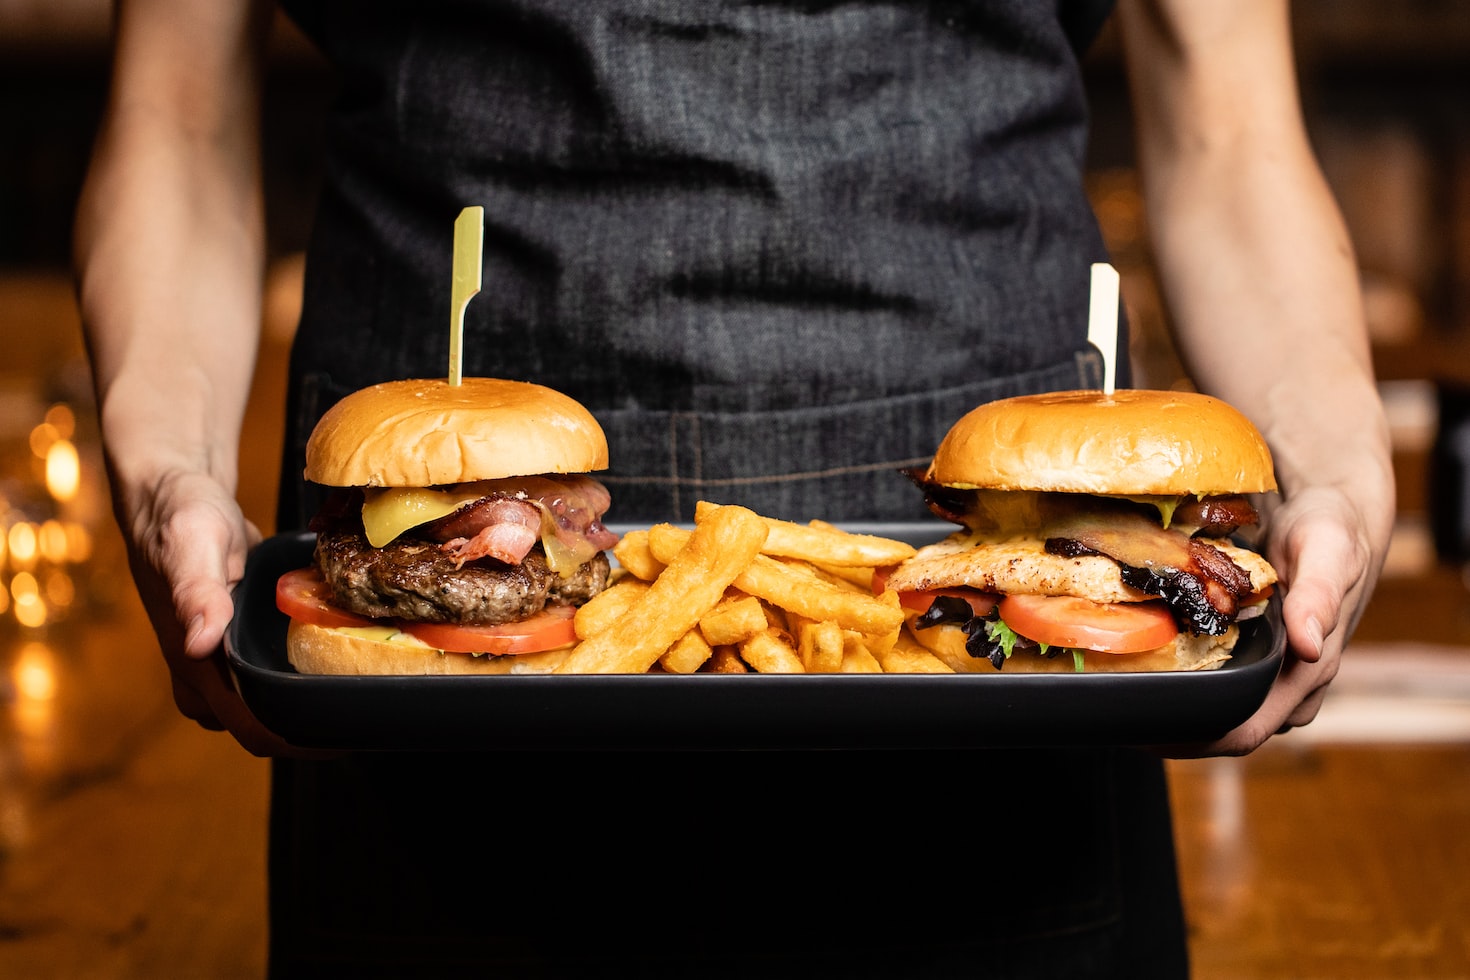 Burgers with buns and fries on a tray